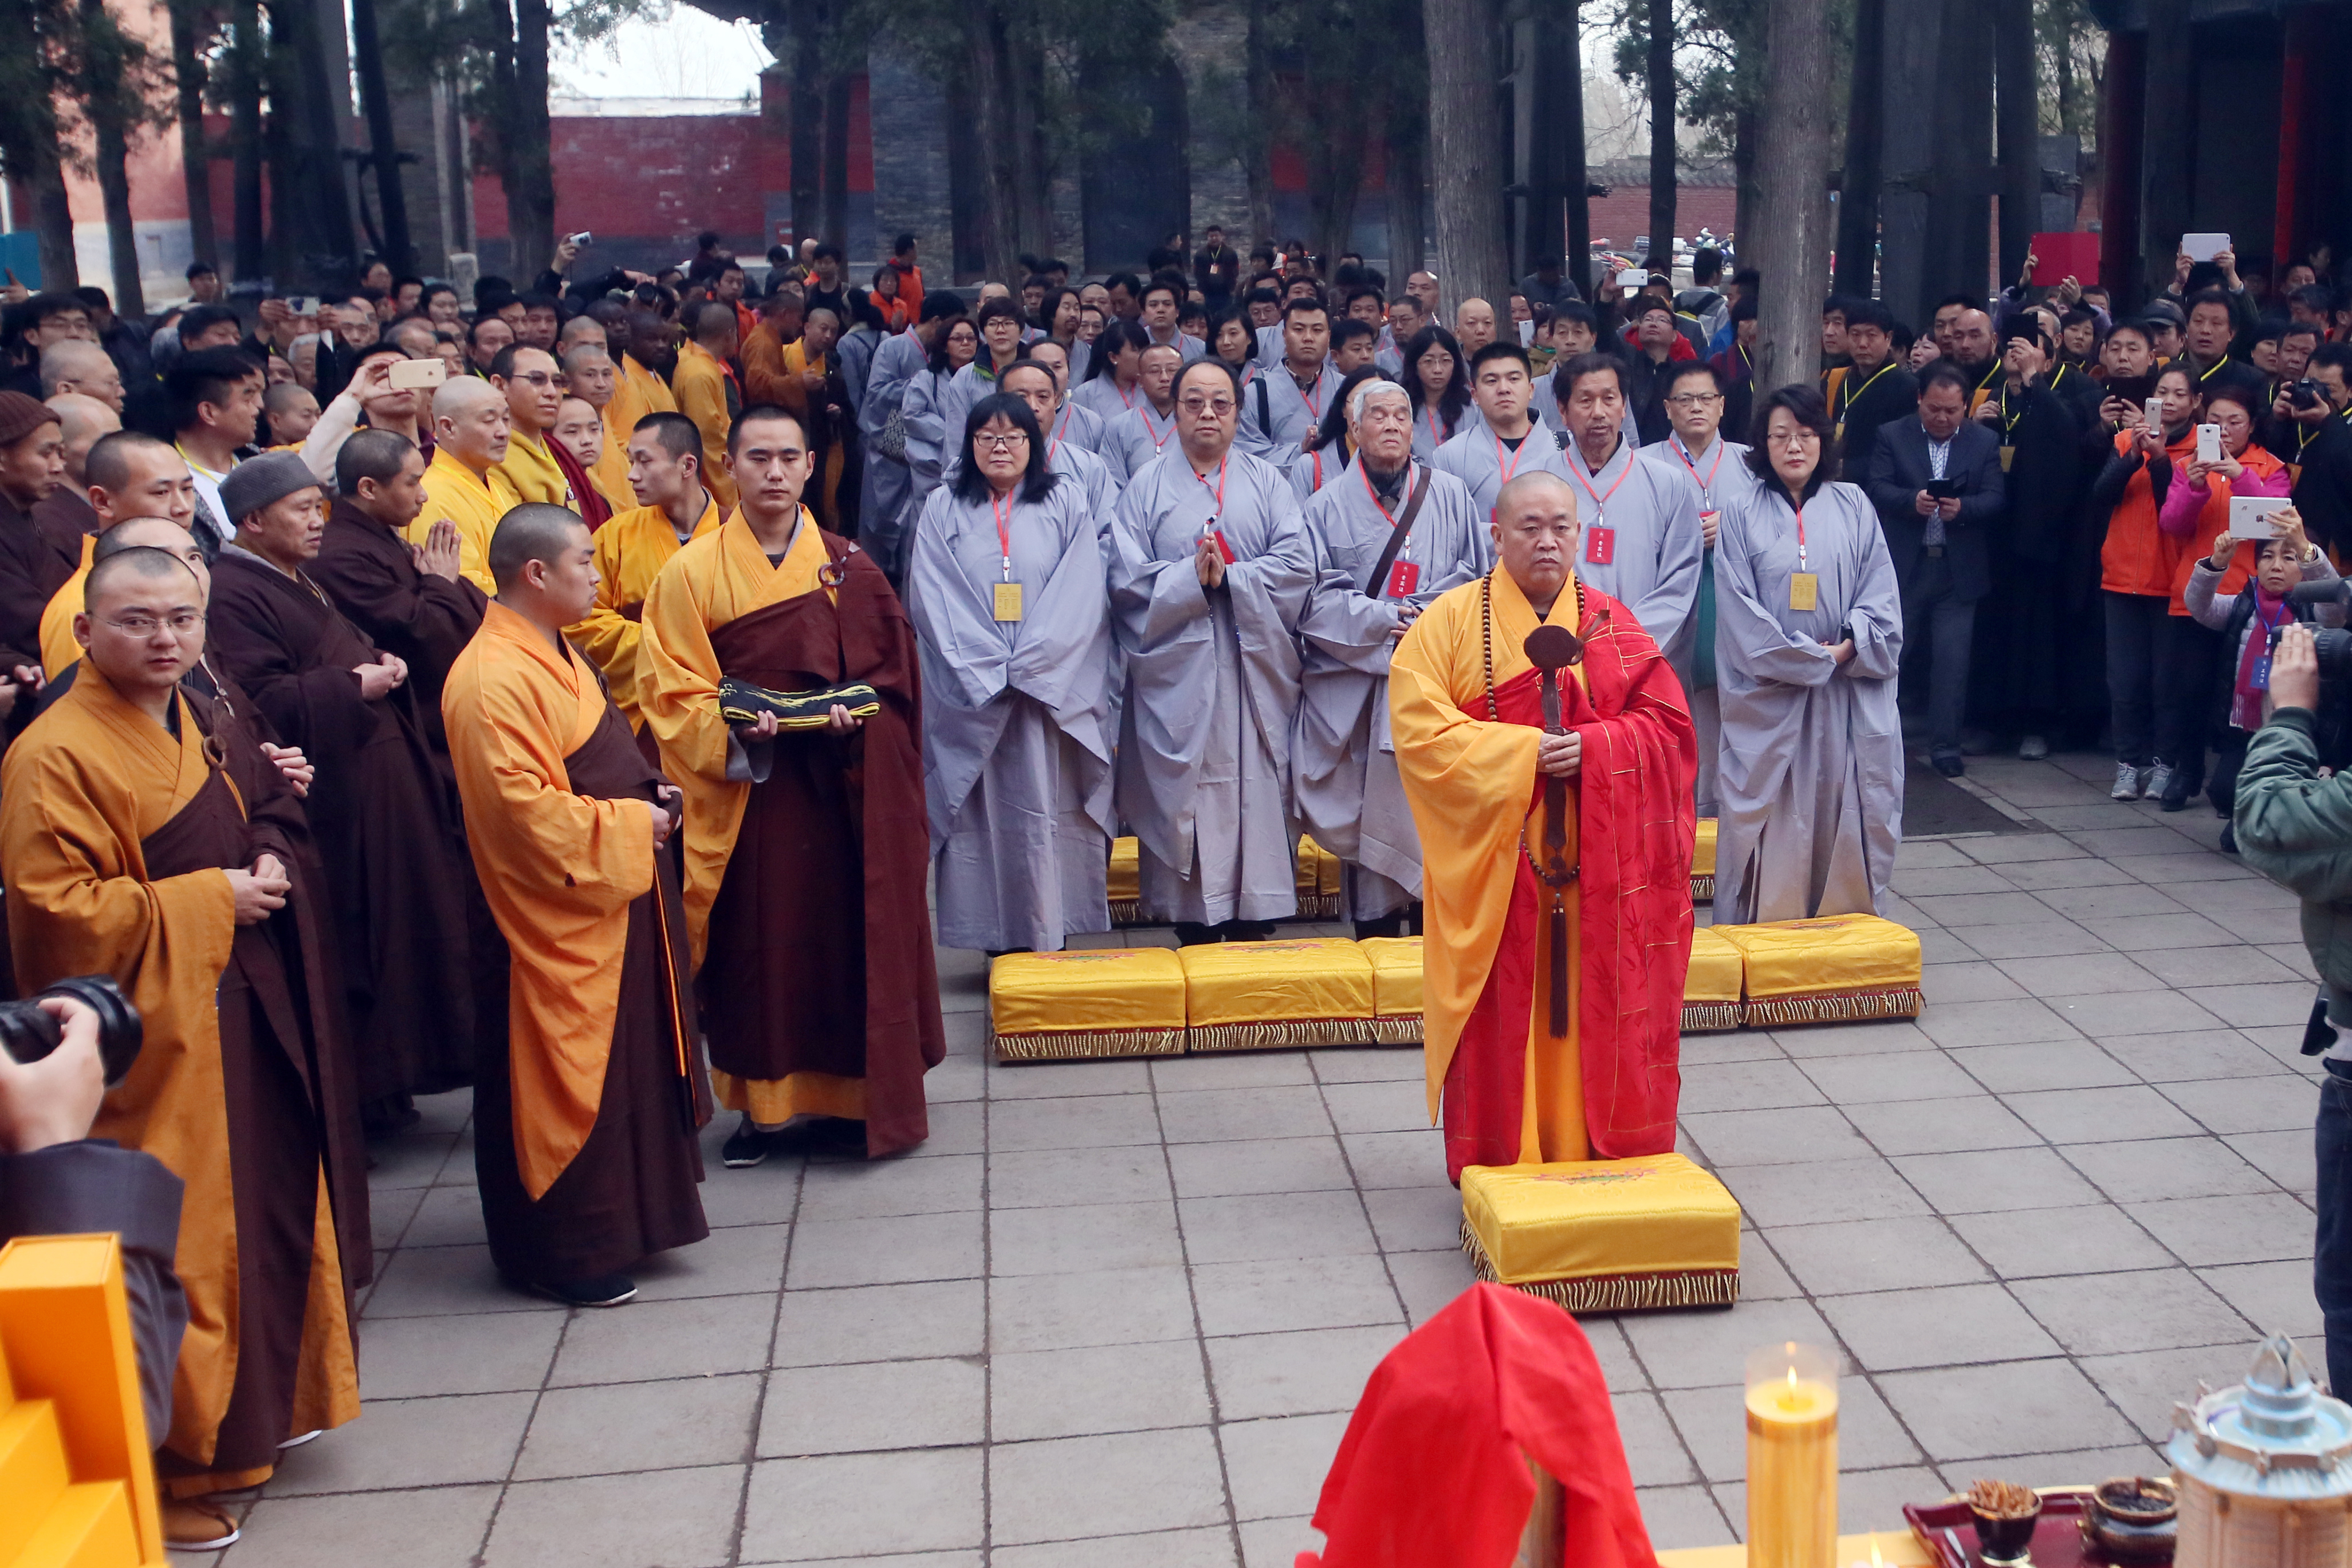 Shi Yongxin of Shaolin Temple presides over the "Ten Thousand People Copy Confucian Classics" launching ceremony on Dragon Heads-raising Day on March 21, 2015 in Zhengzhou, Henan province of China. (ChinaFotoPress/Getty Images)